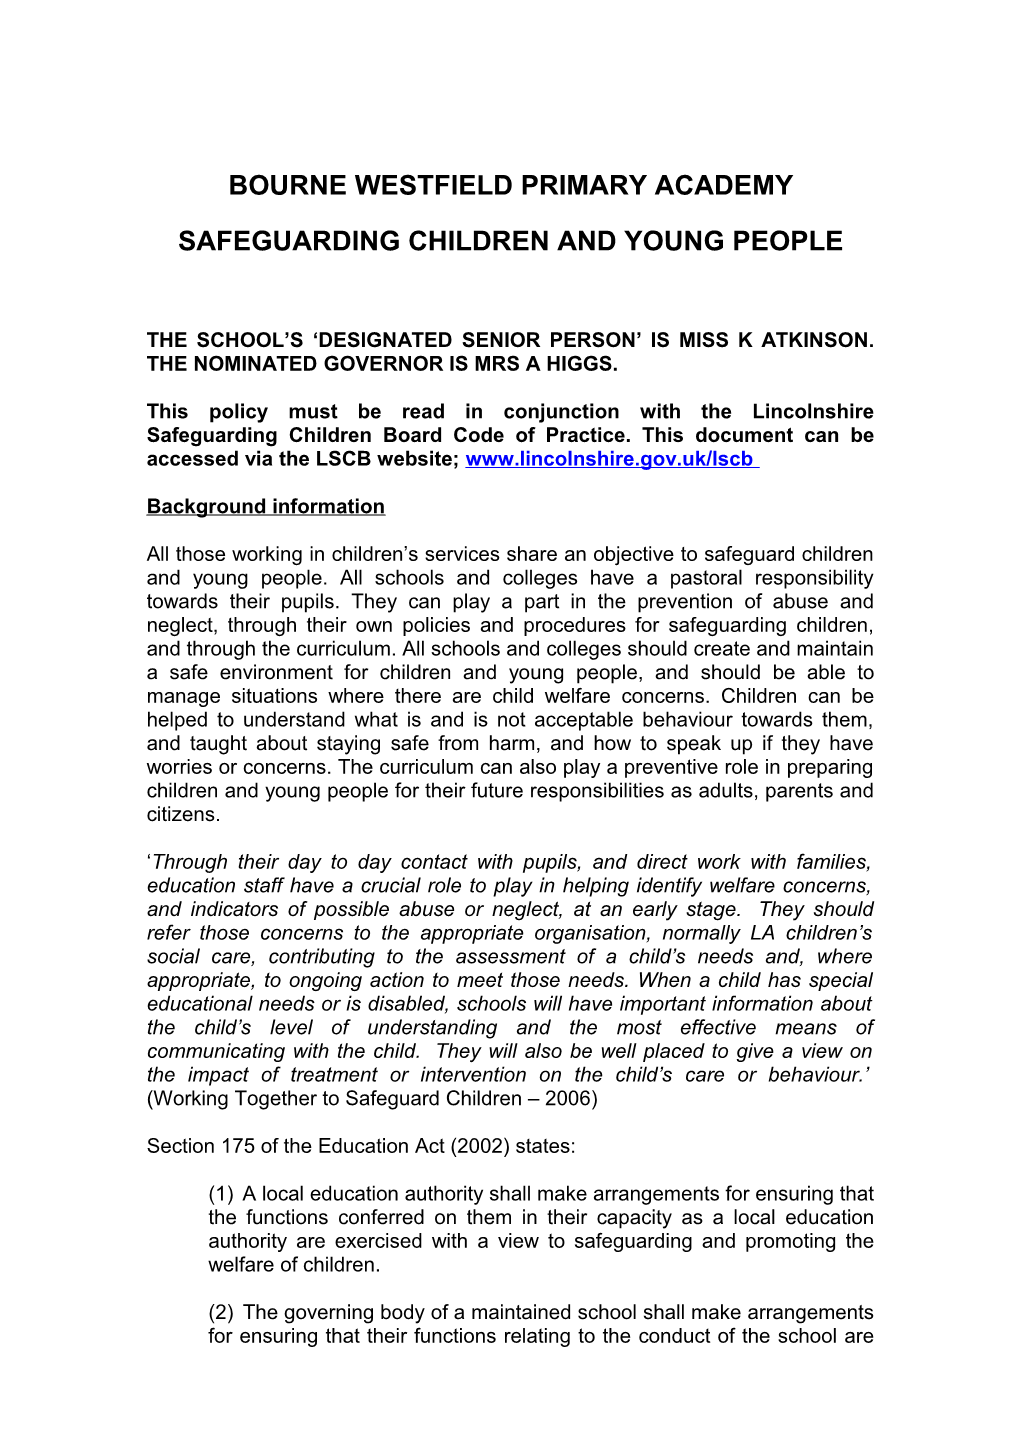 Safeguarding Children and Young People Policy for Bourne Westfield Primary School